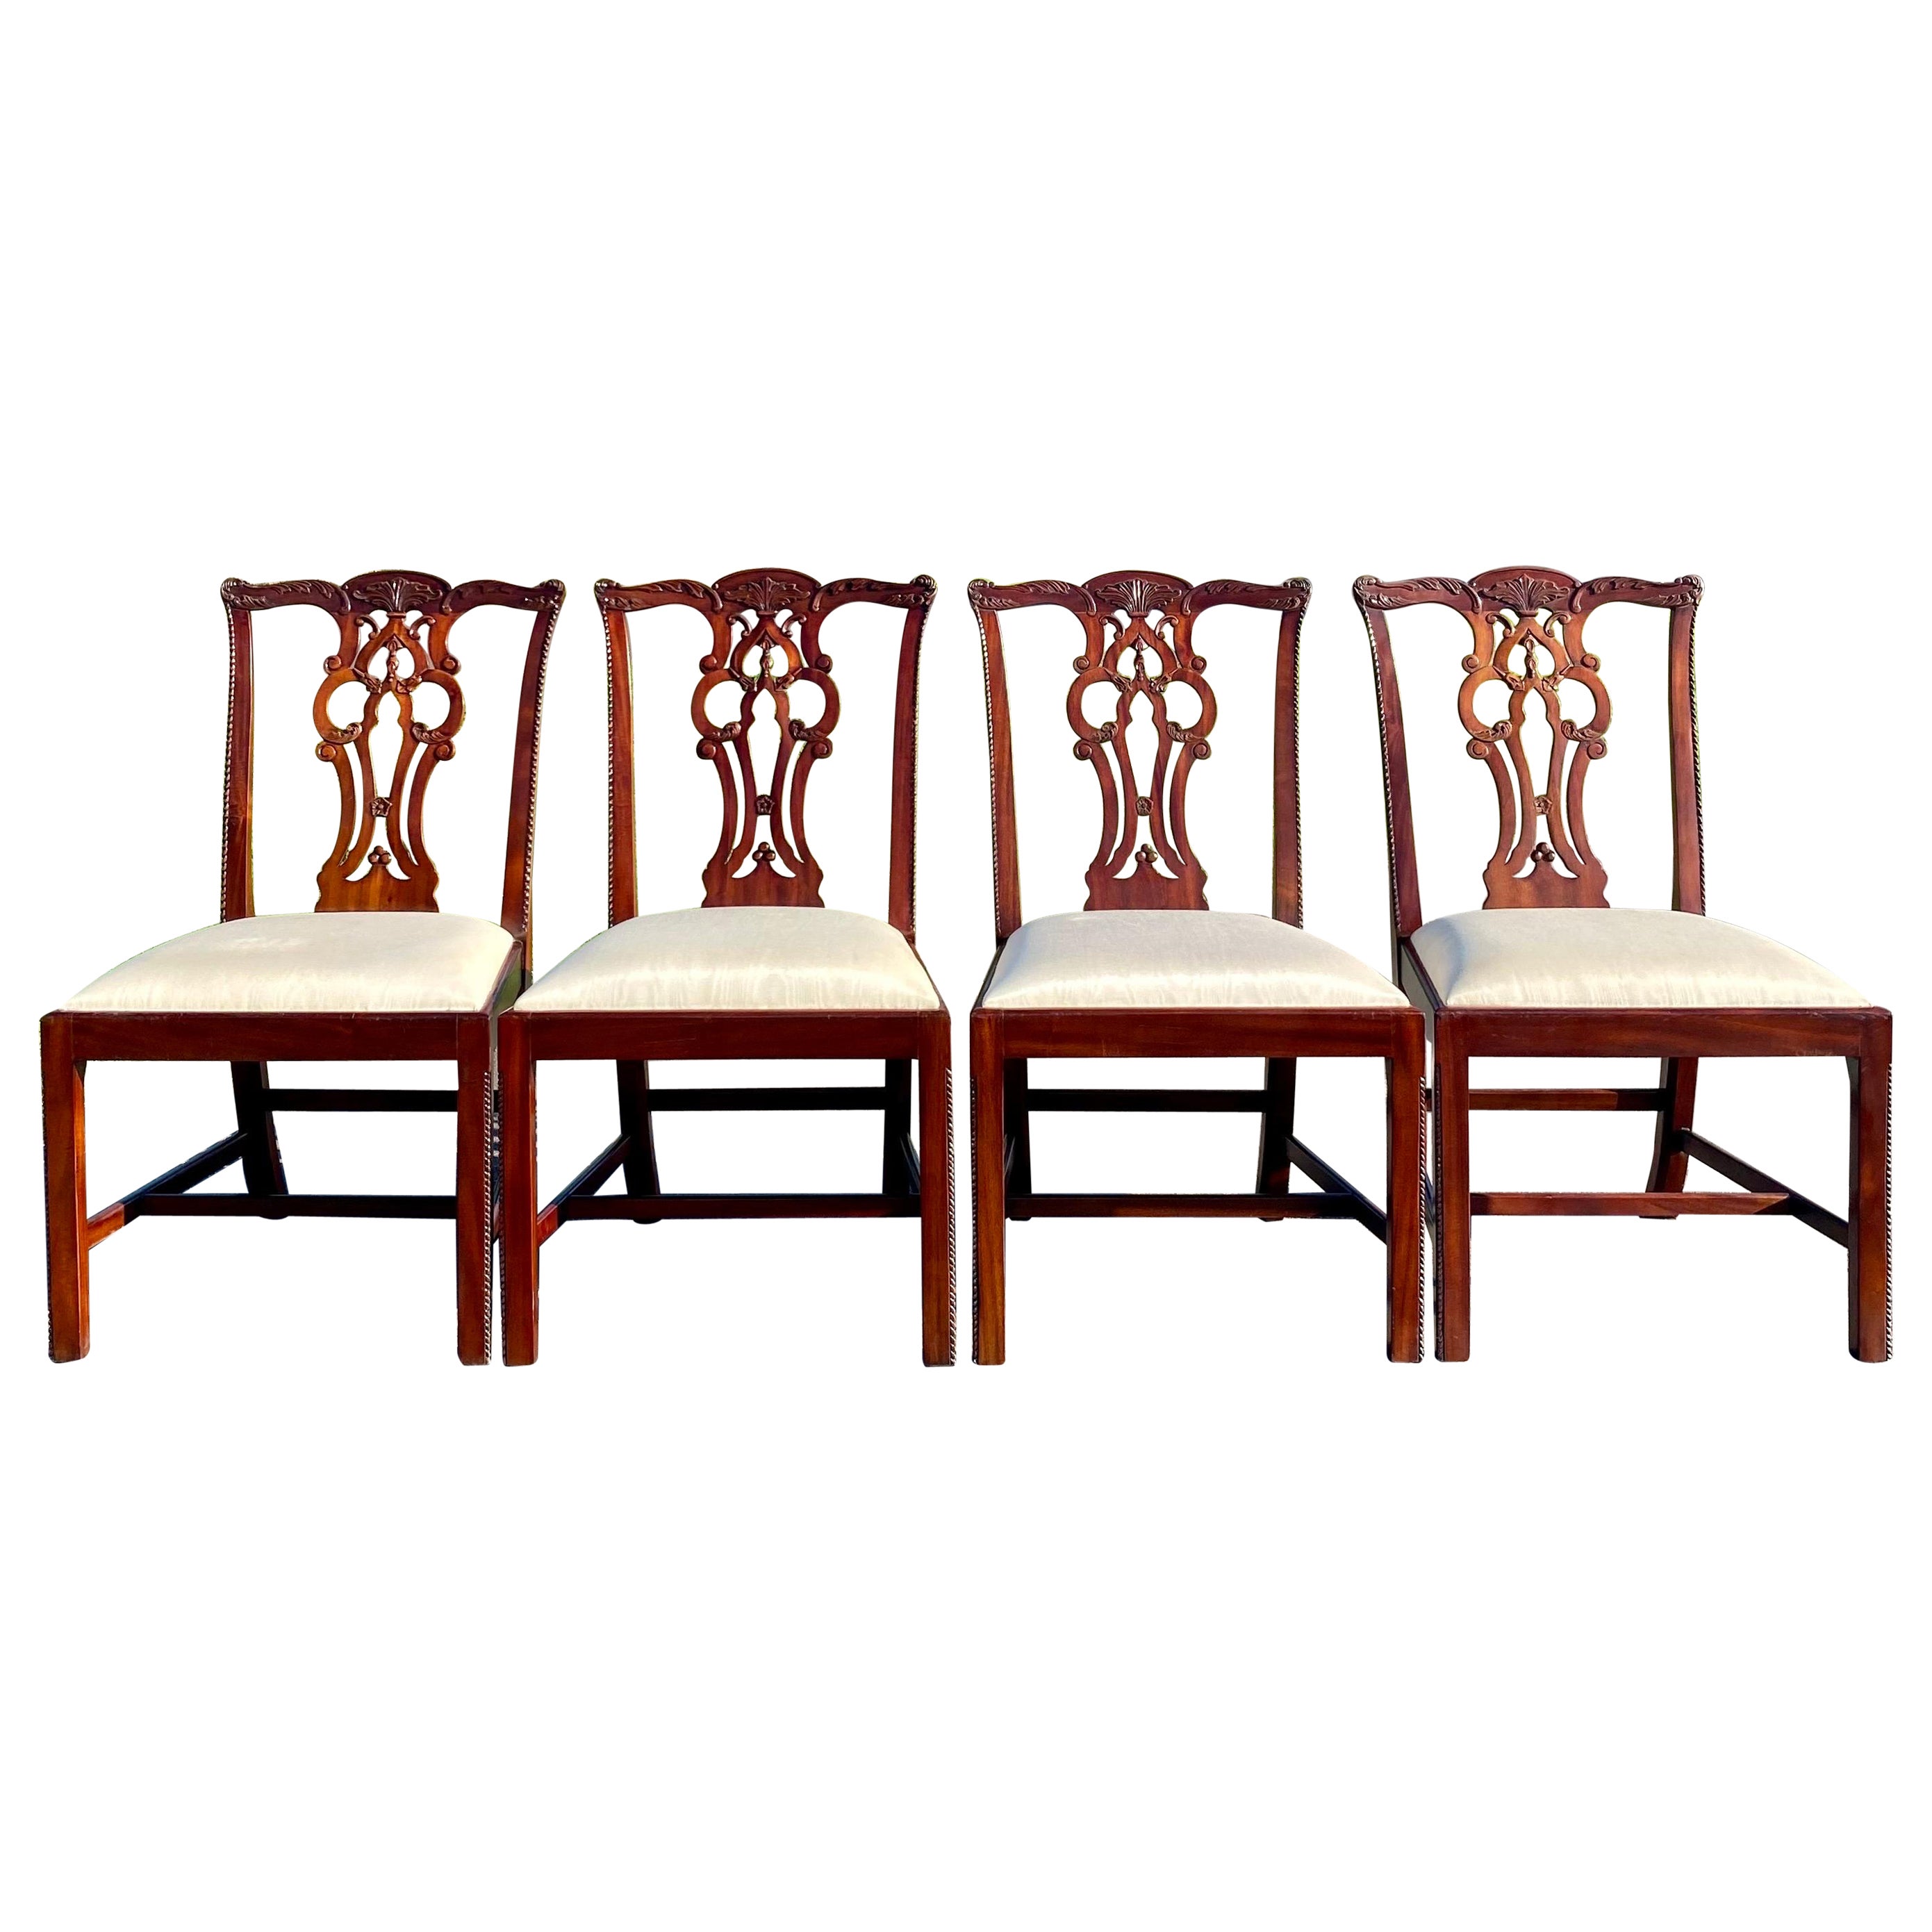 Maitland Smith Chippendale Regency Carved Mahogany Dining Side Chairs